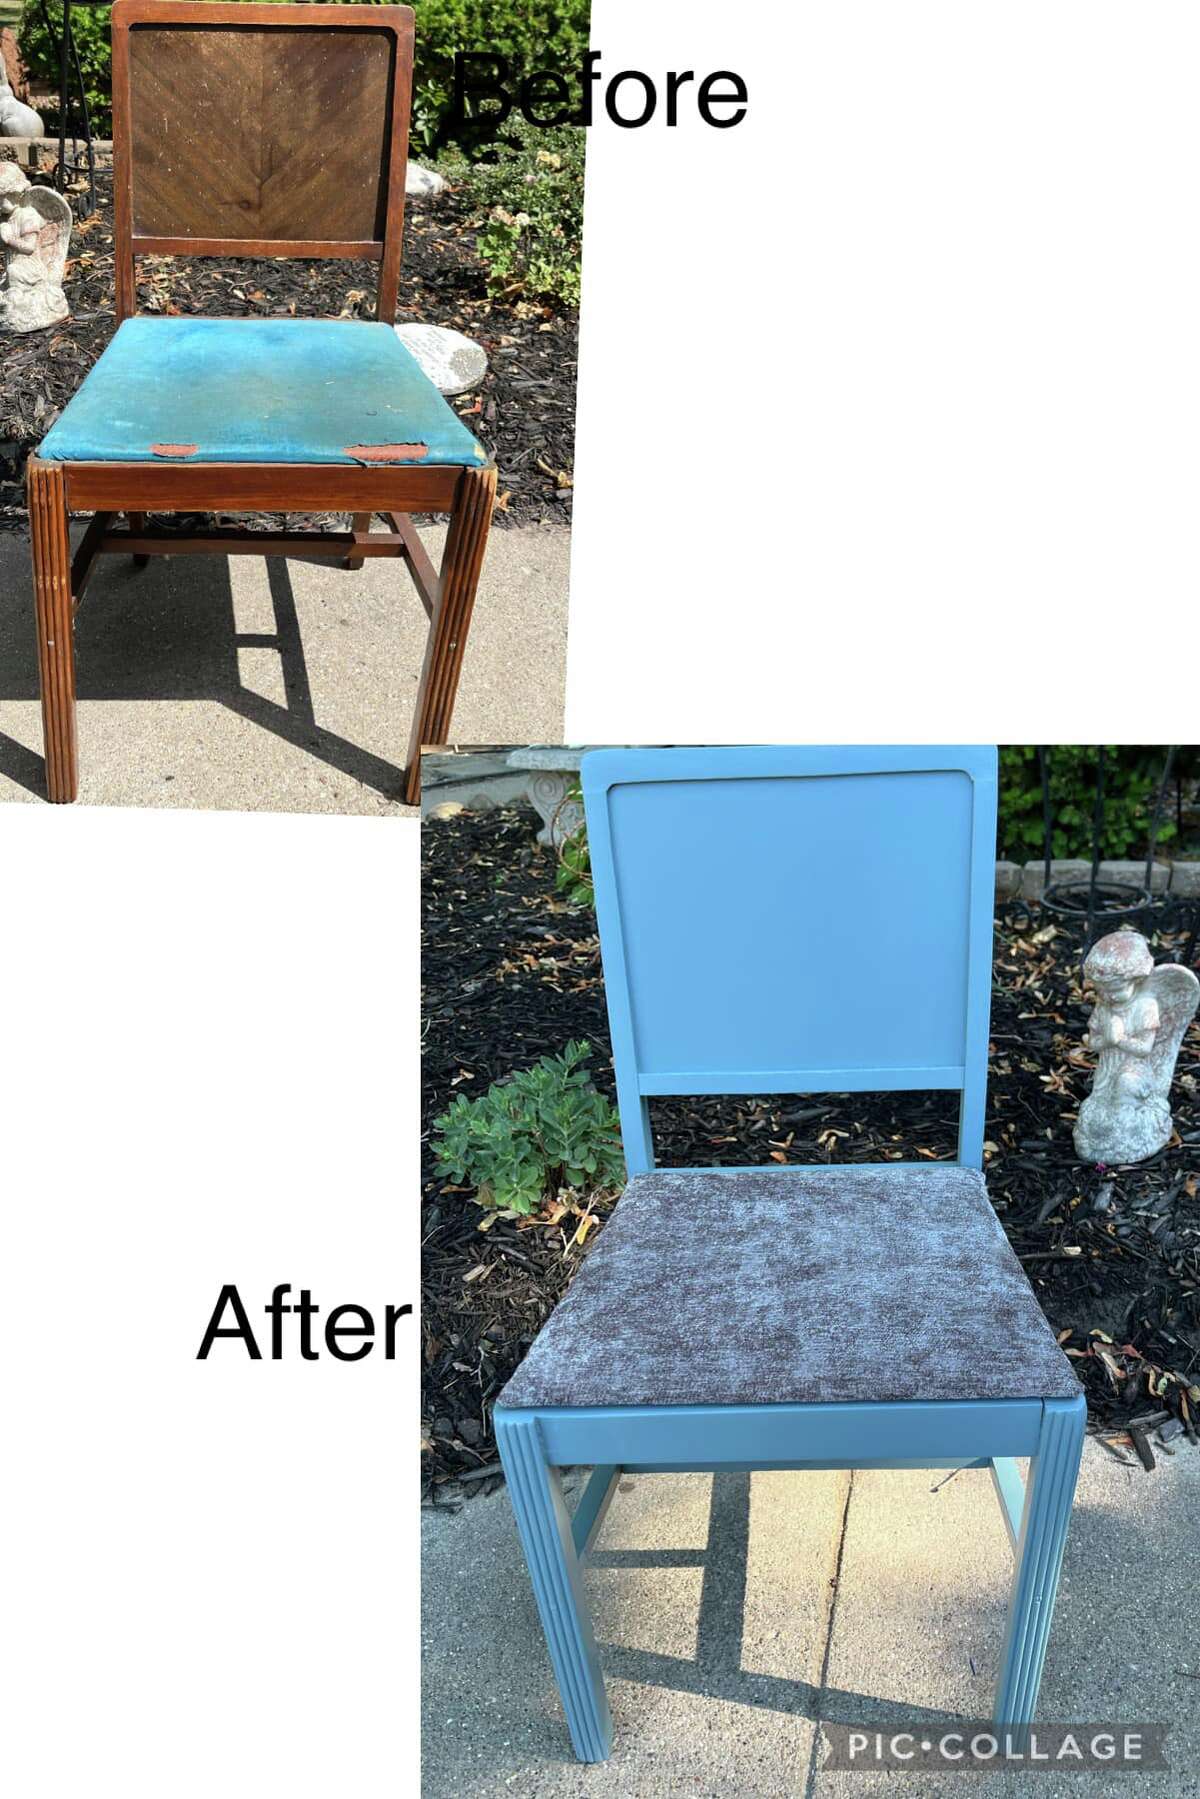 A few pieces that Smith has worked on over the years, transforming them into wonderful furniture pieces.